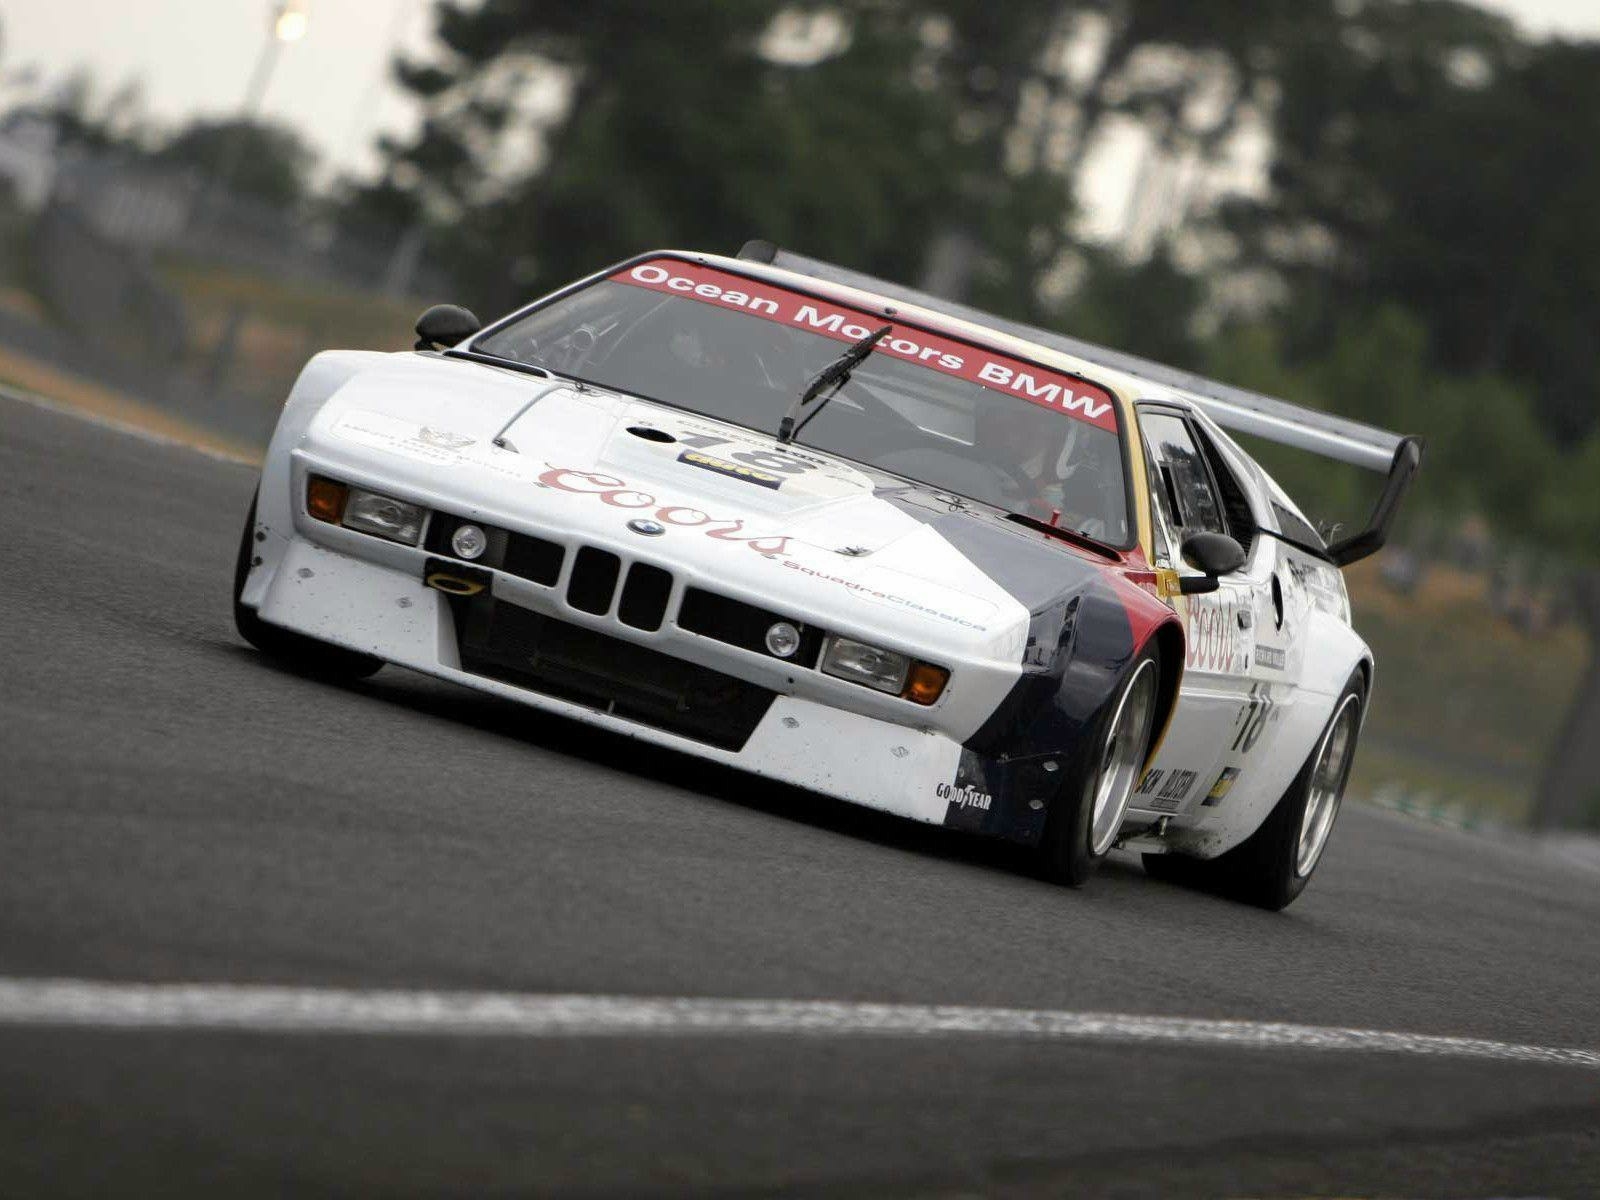 Bmw M1 HD Wallpaper Background Image Photos Pictures Yl